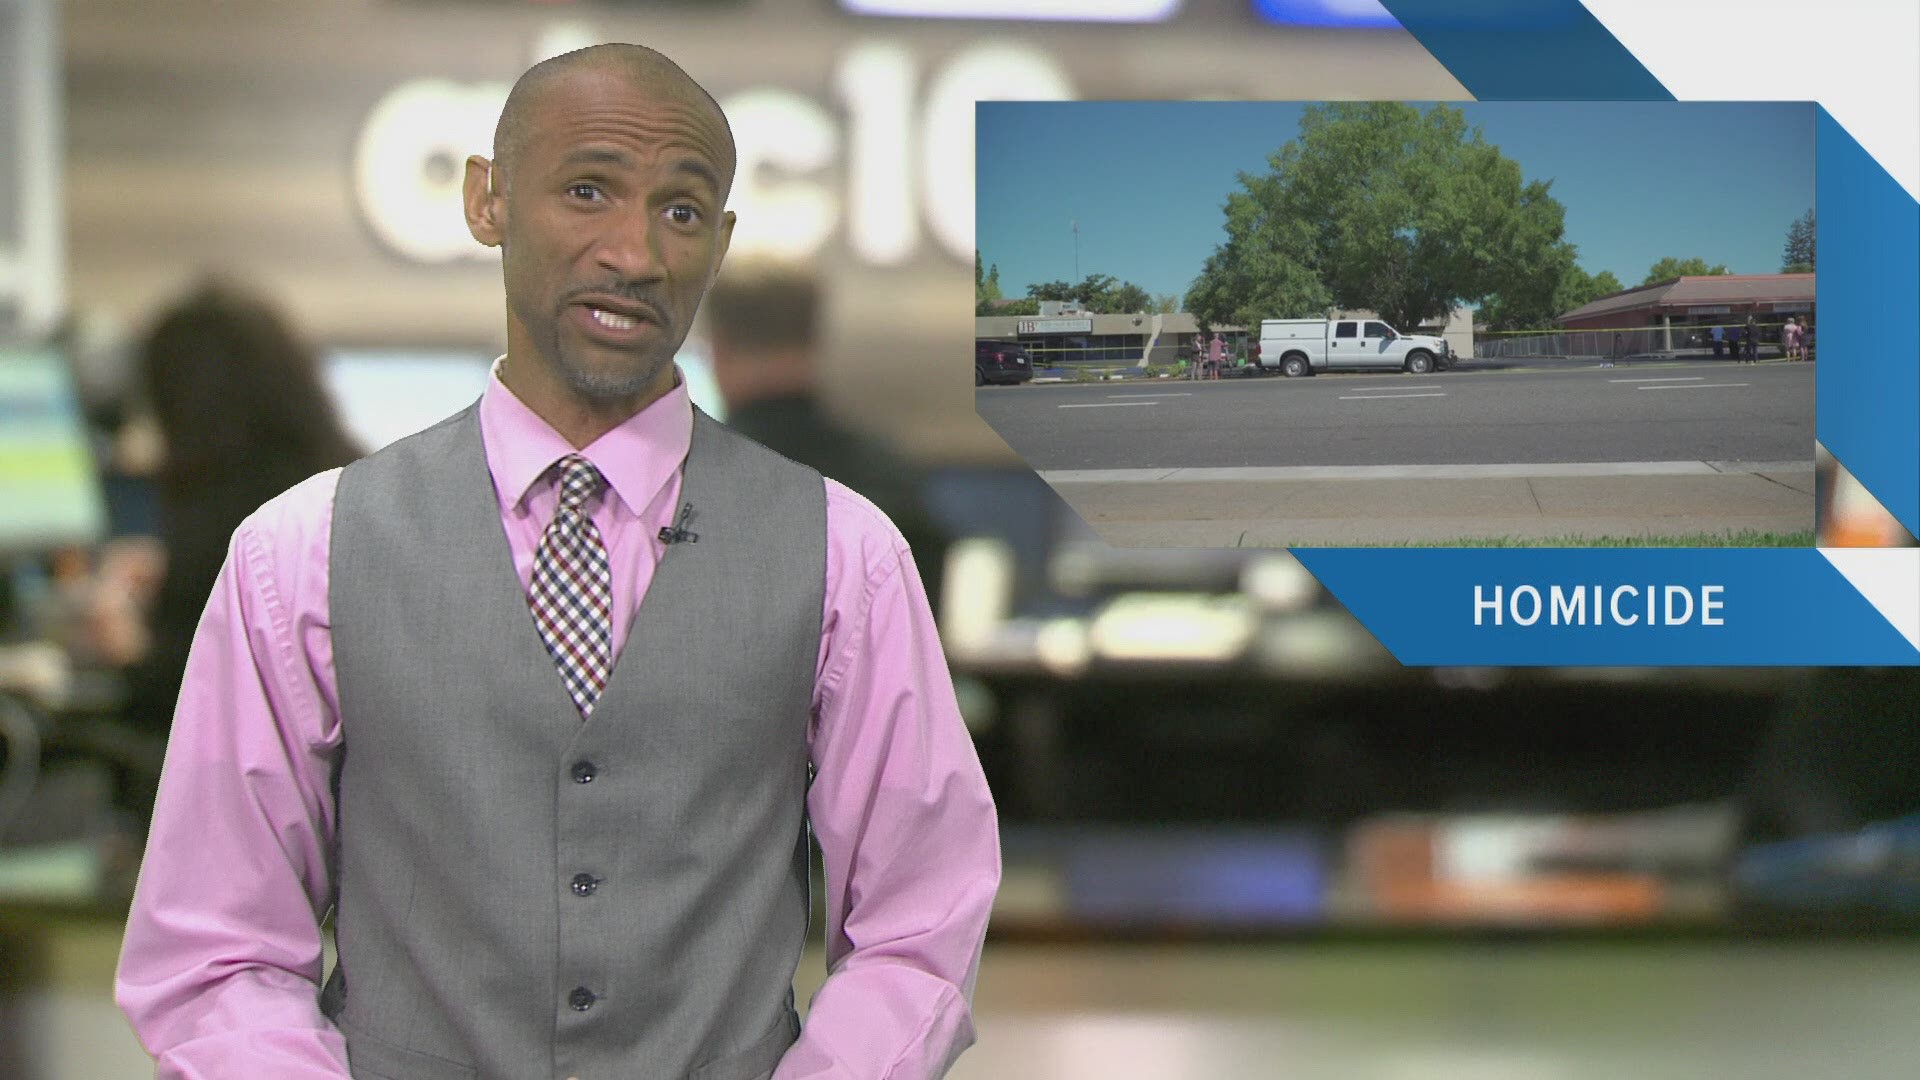 Evening Headlines: September 8, 2019 | Catch in-depth reporting on #LateNewsTonight at 11 p.m. | The latest Sacramento news is always at www.abc10.com